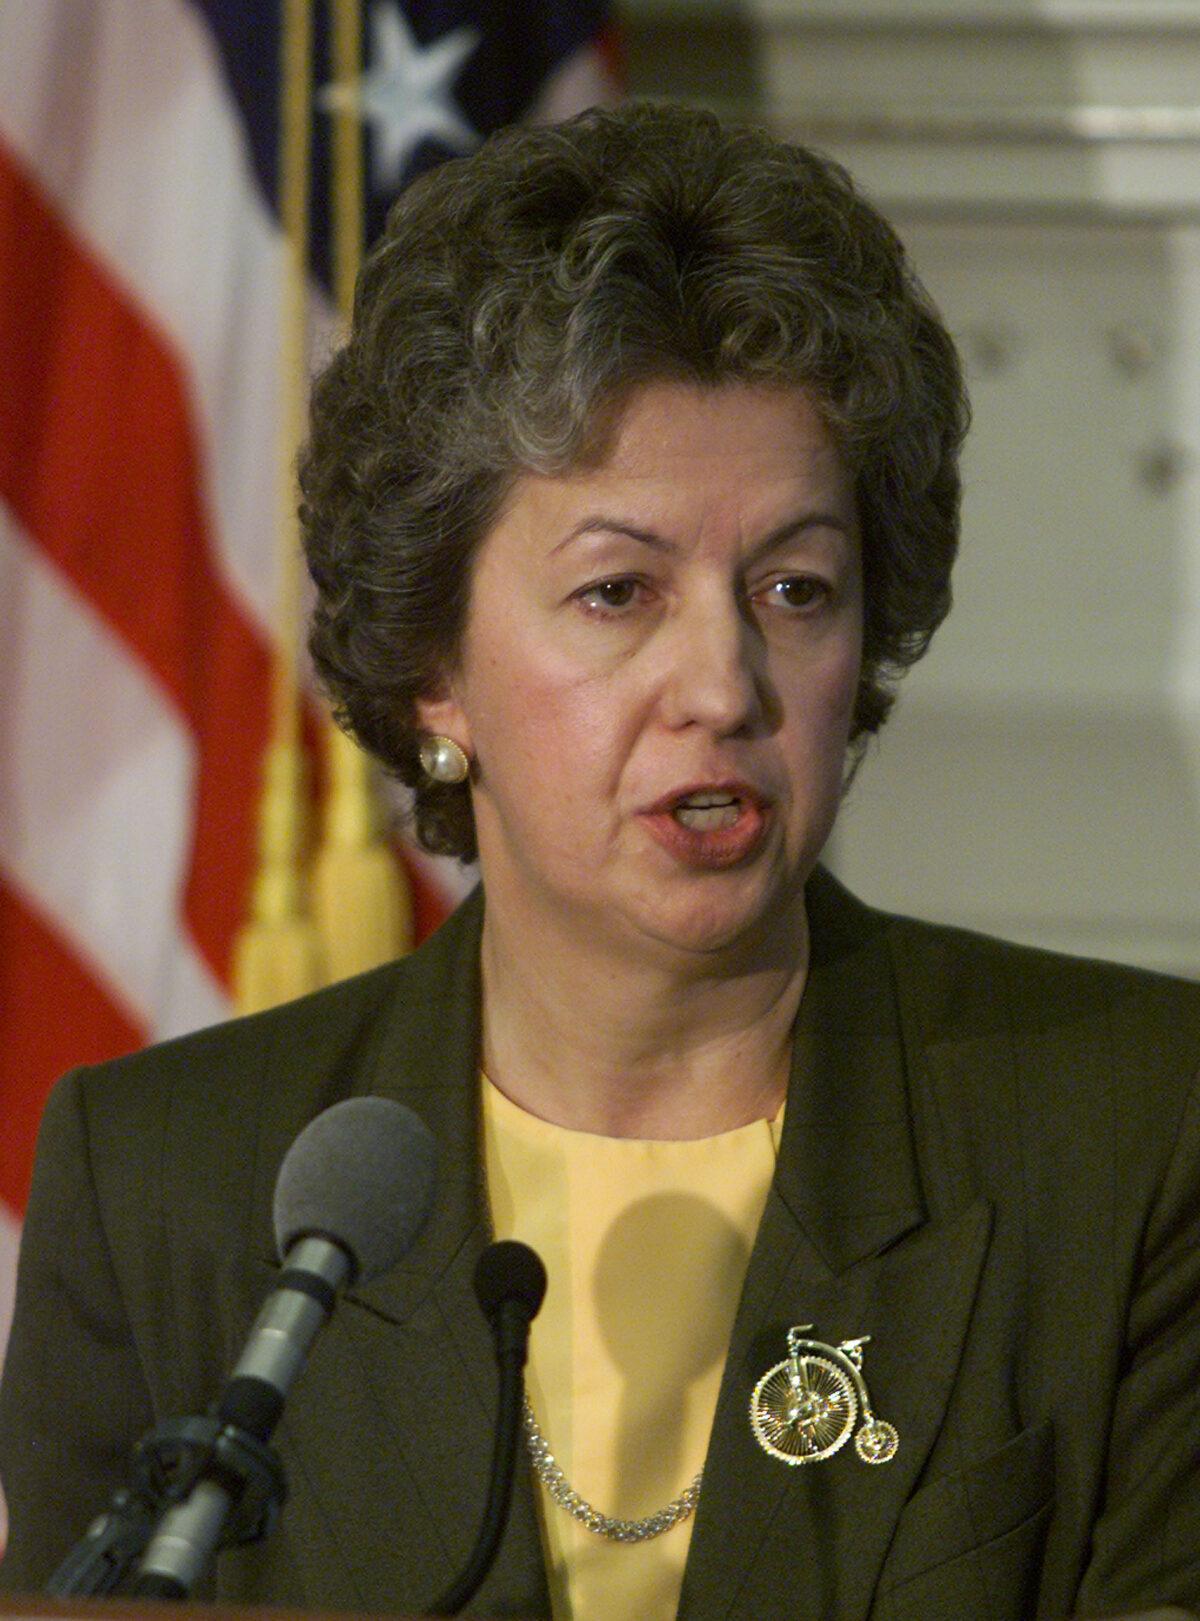 Federal Bureau of Prisons Director Kathleen Hawk Sawyer in a 2001 file photograph. (Mark Wilson/Newsmakers)